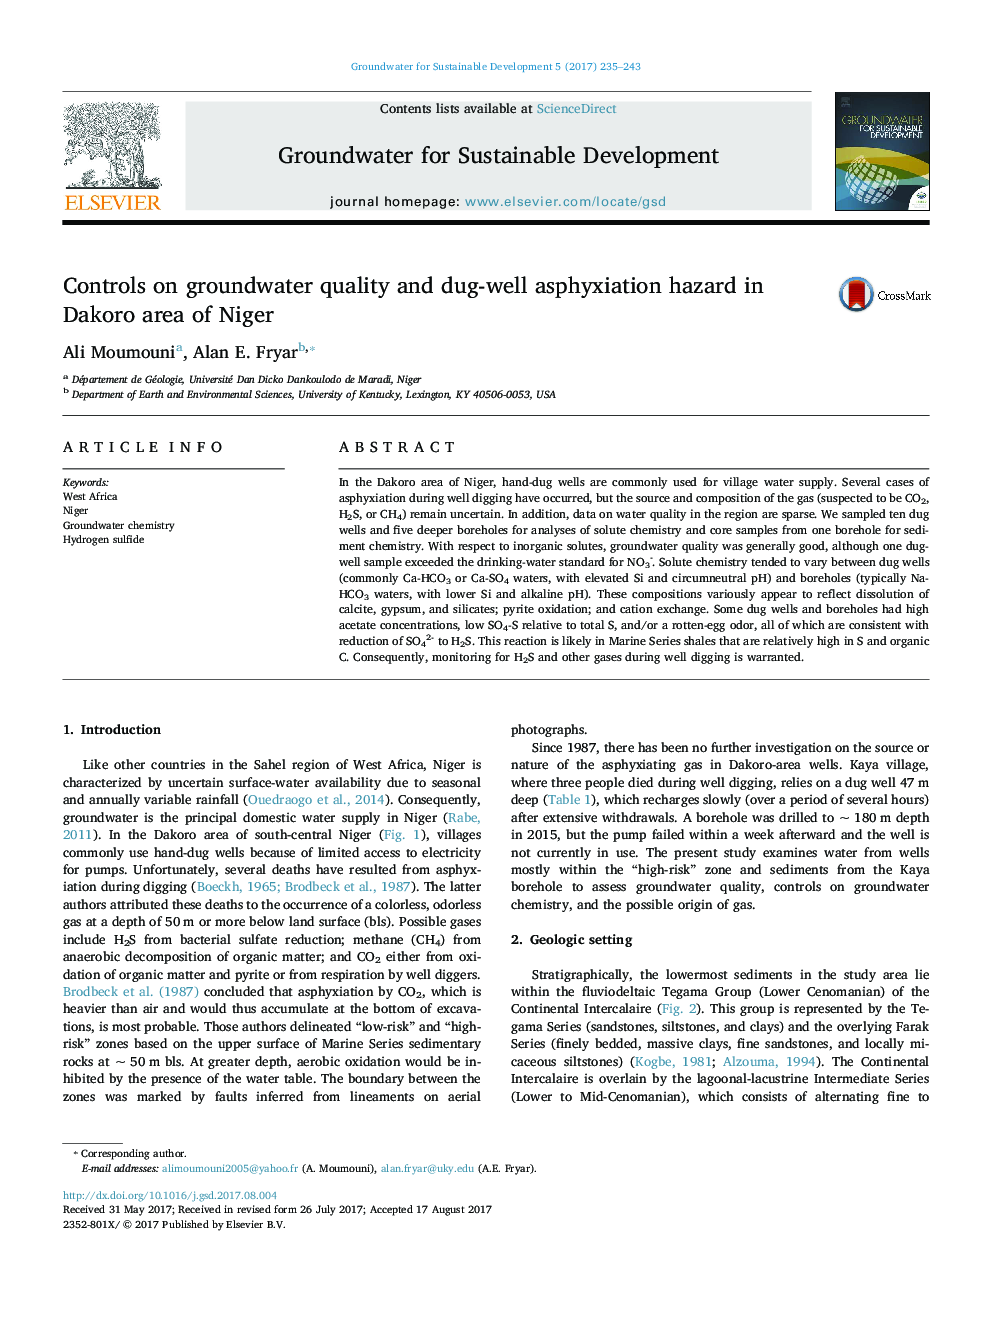 Controls on groundwater quality and dug-well asphyxiation hazard in Dakoro area of Niger